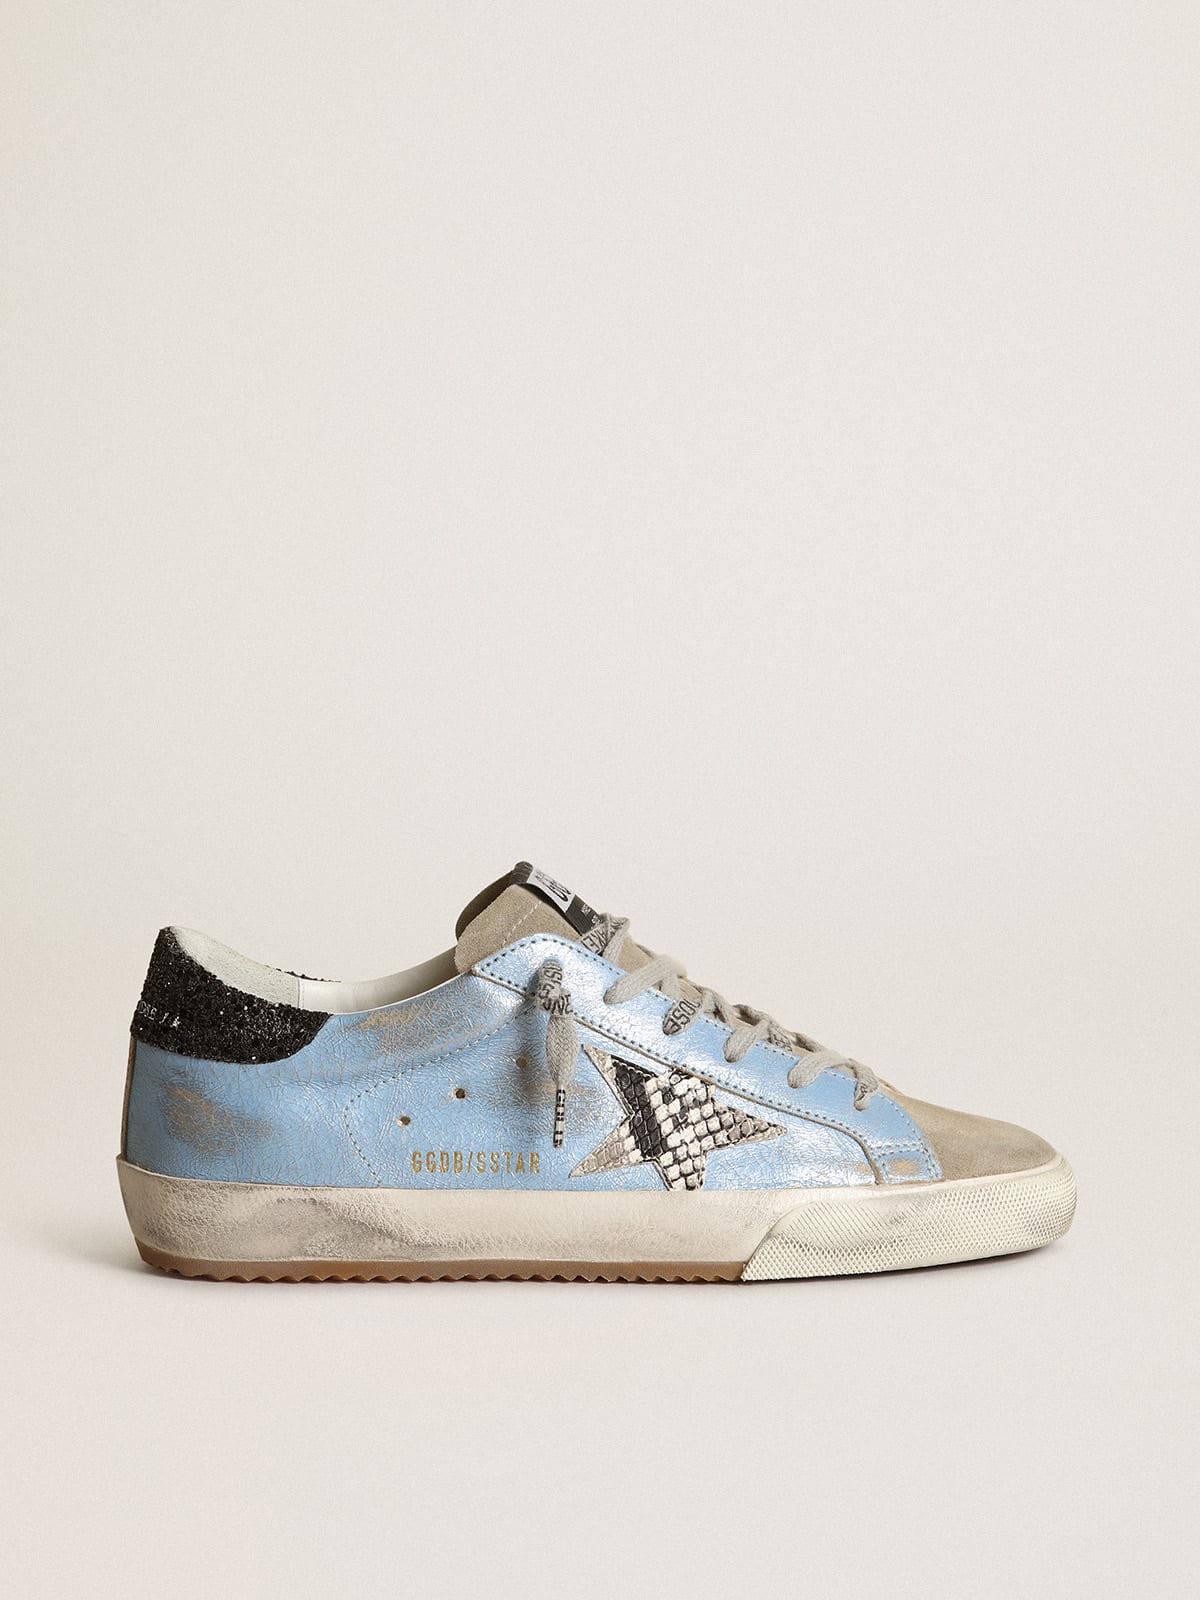 Golden Goose - Light blue Super-Star LTD with a gray star and glitter heel tab in 